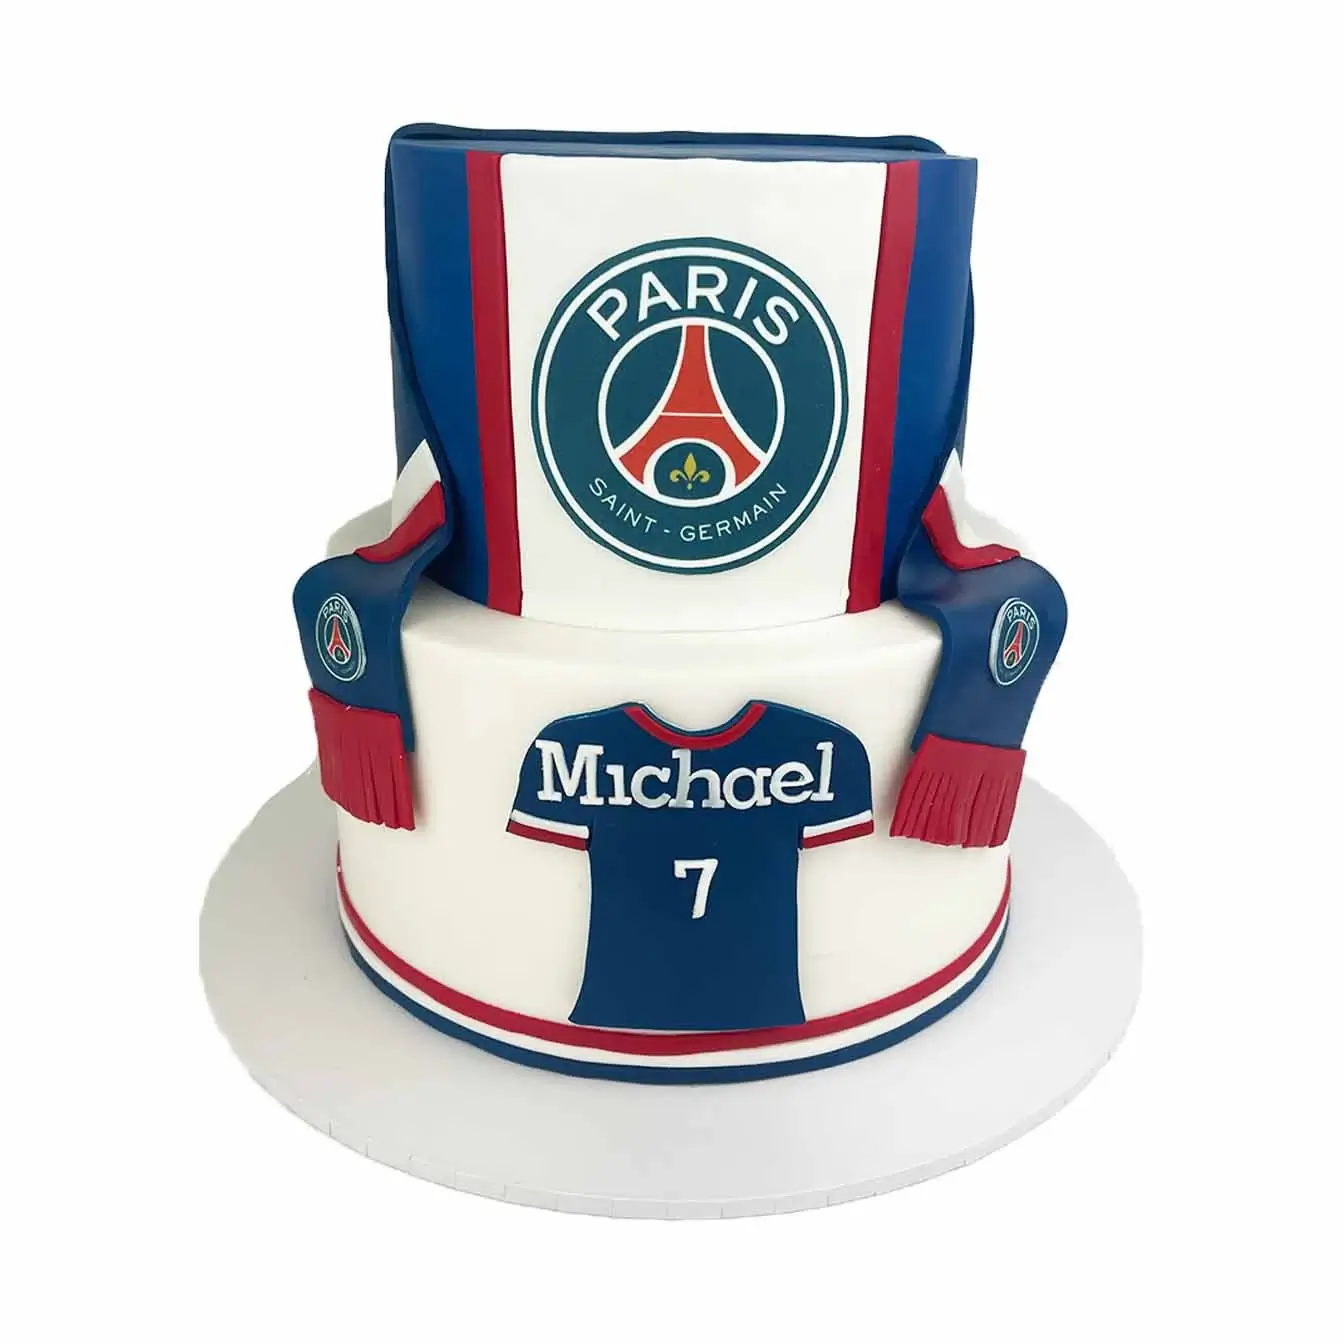 Soccer Team Cake - A 2-tier cake with a soccer jersey on the front and a scarf on the top tier, a perfect centerpiece for soccer enthusiasts and festive gatherings.